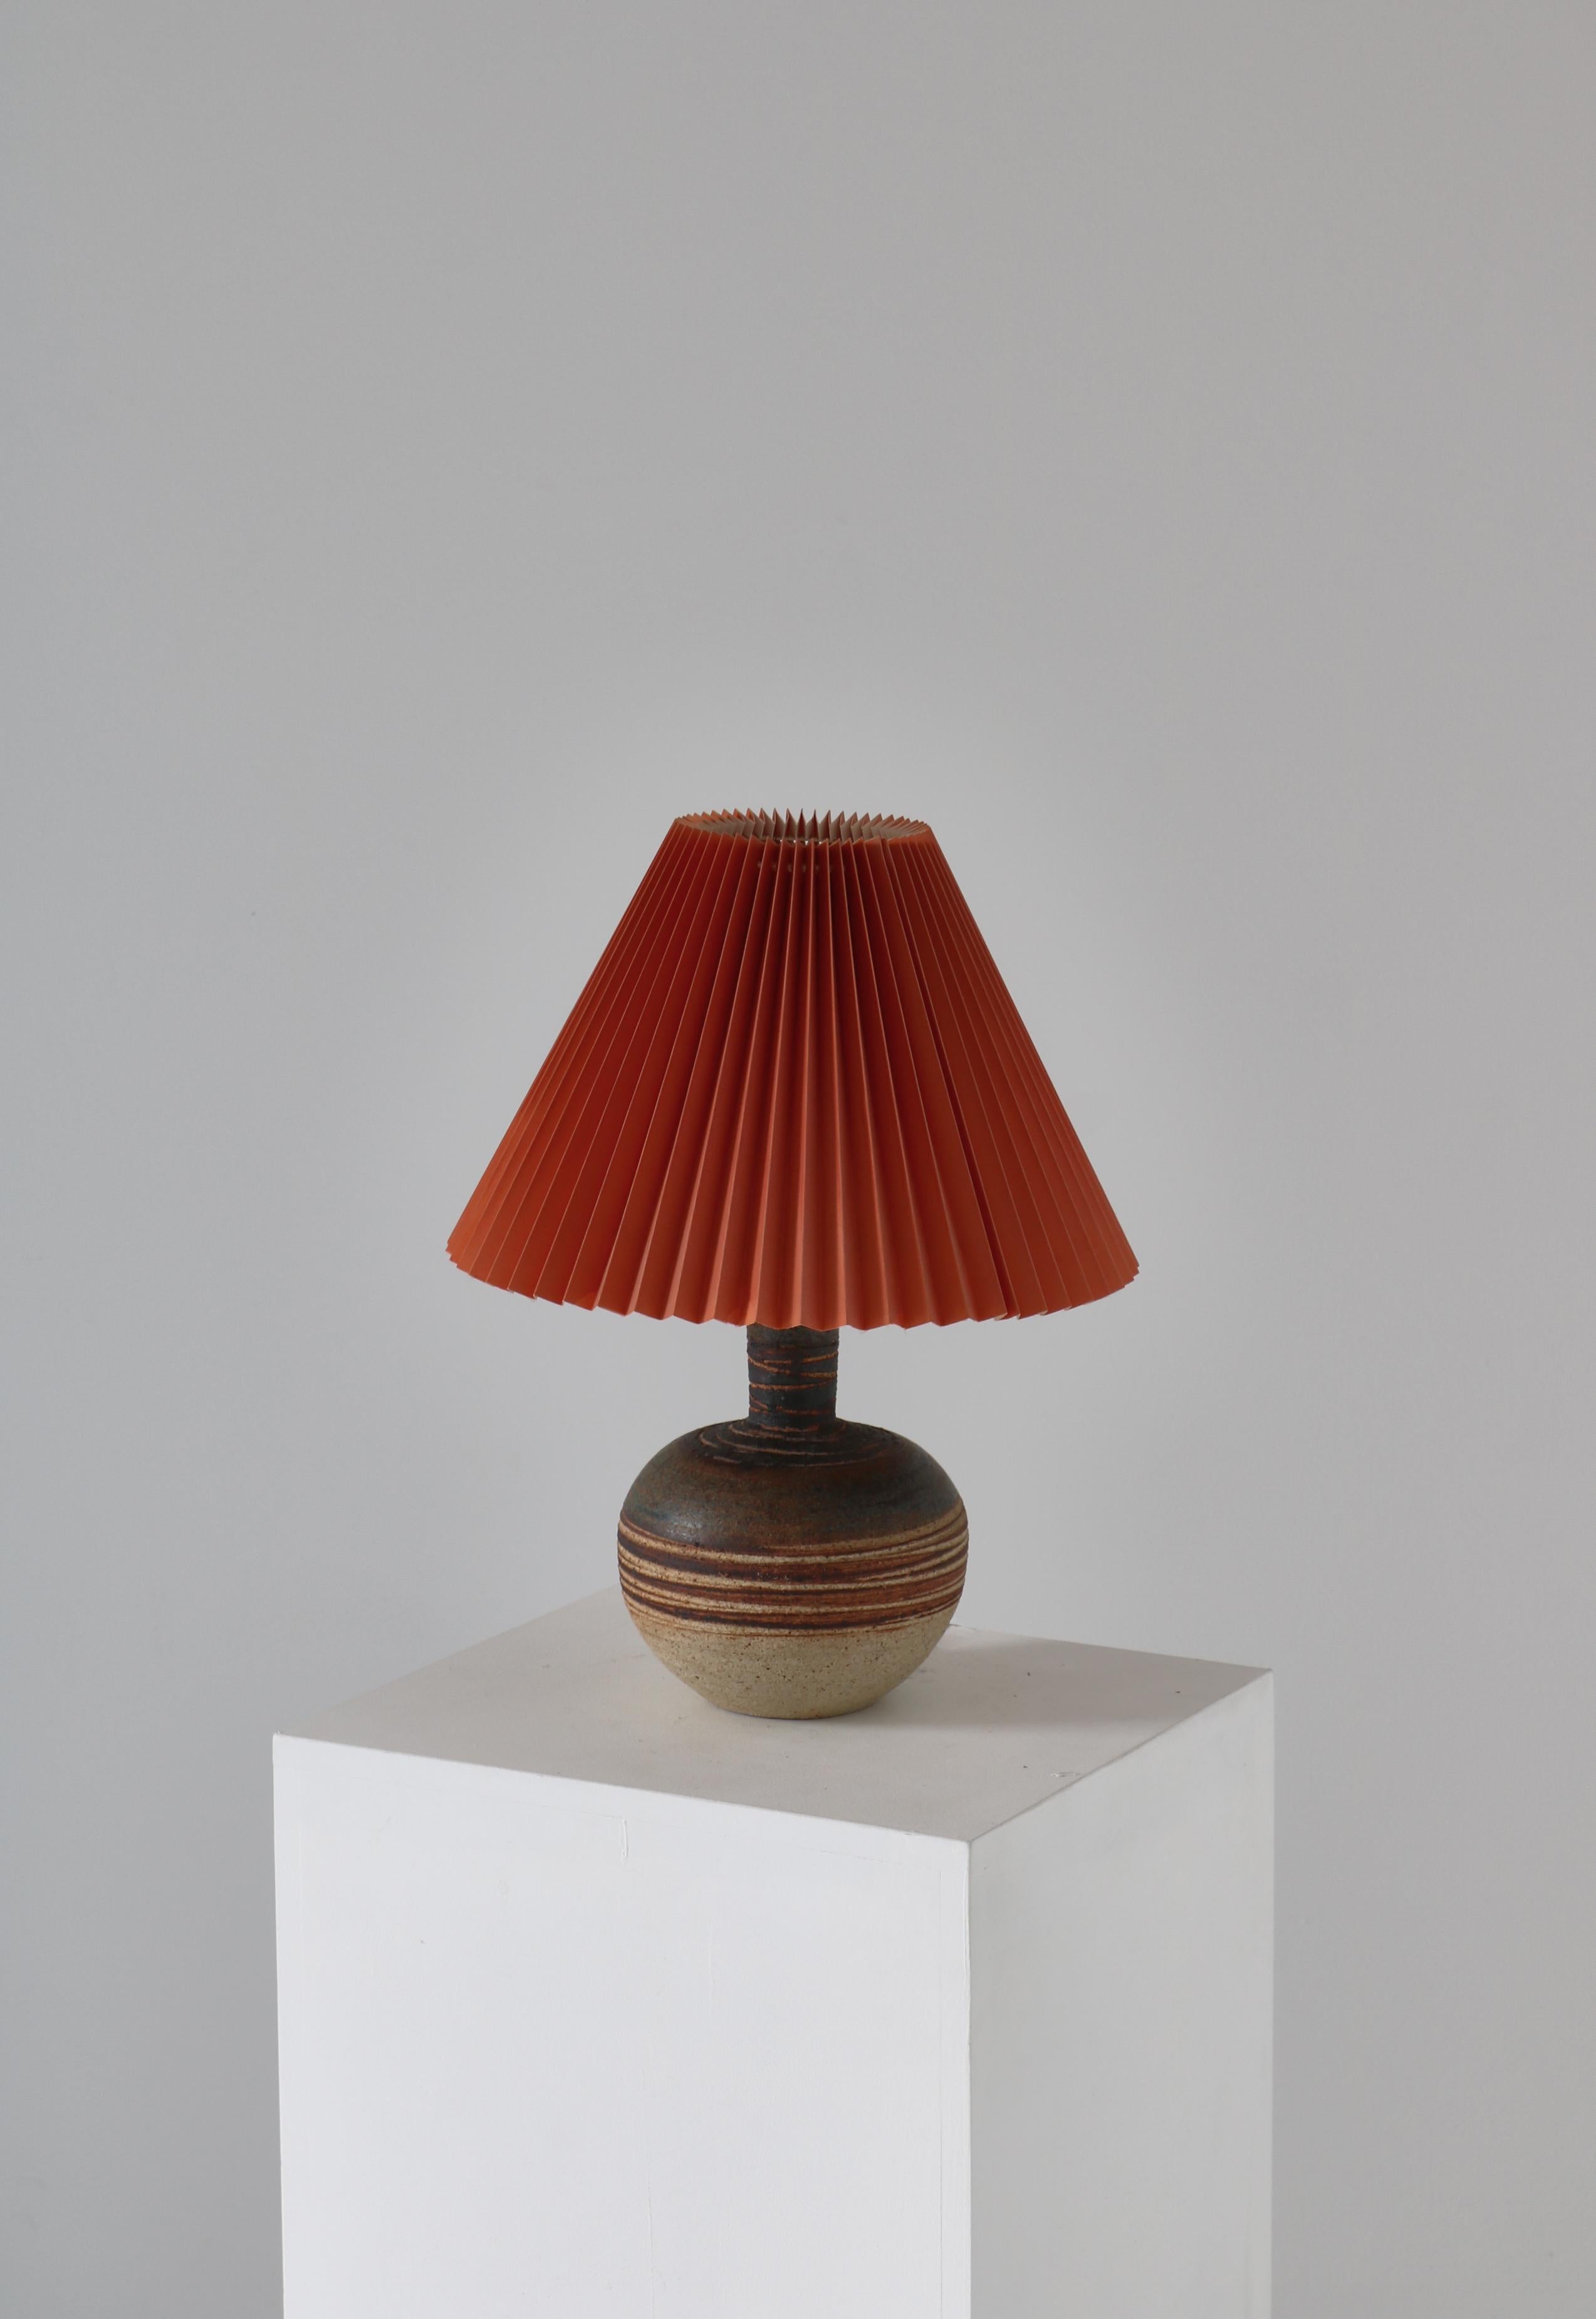 Tue Poulsen Table Lamp Scandinavian Modern Ceramic in Earth Colors, 1960s In Good Condition For Sale In Odense, DK